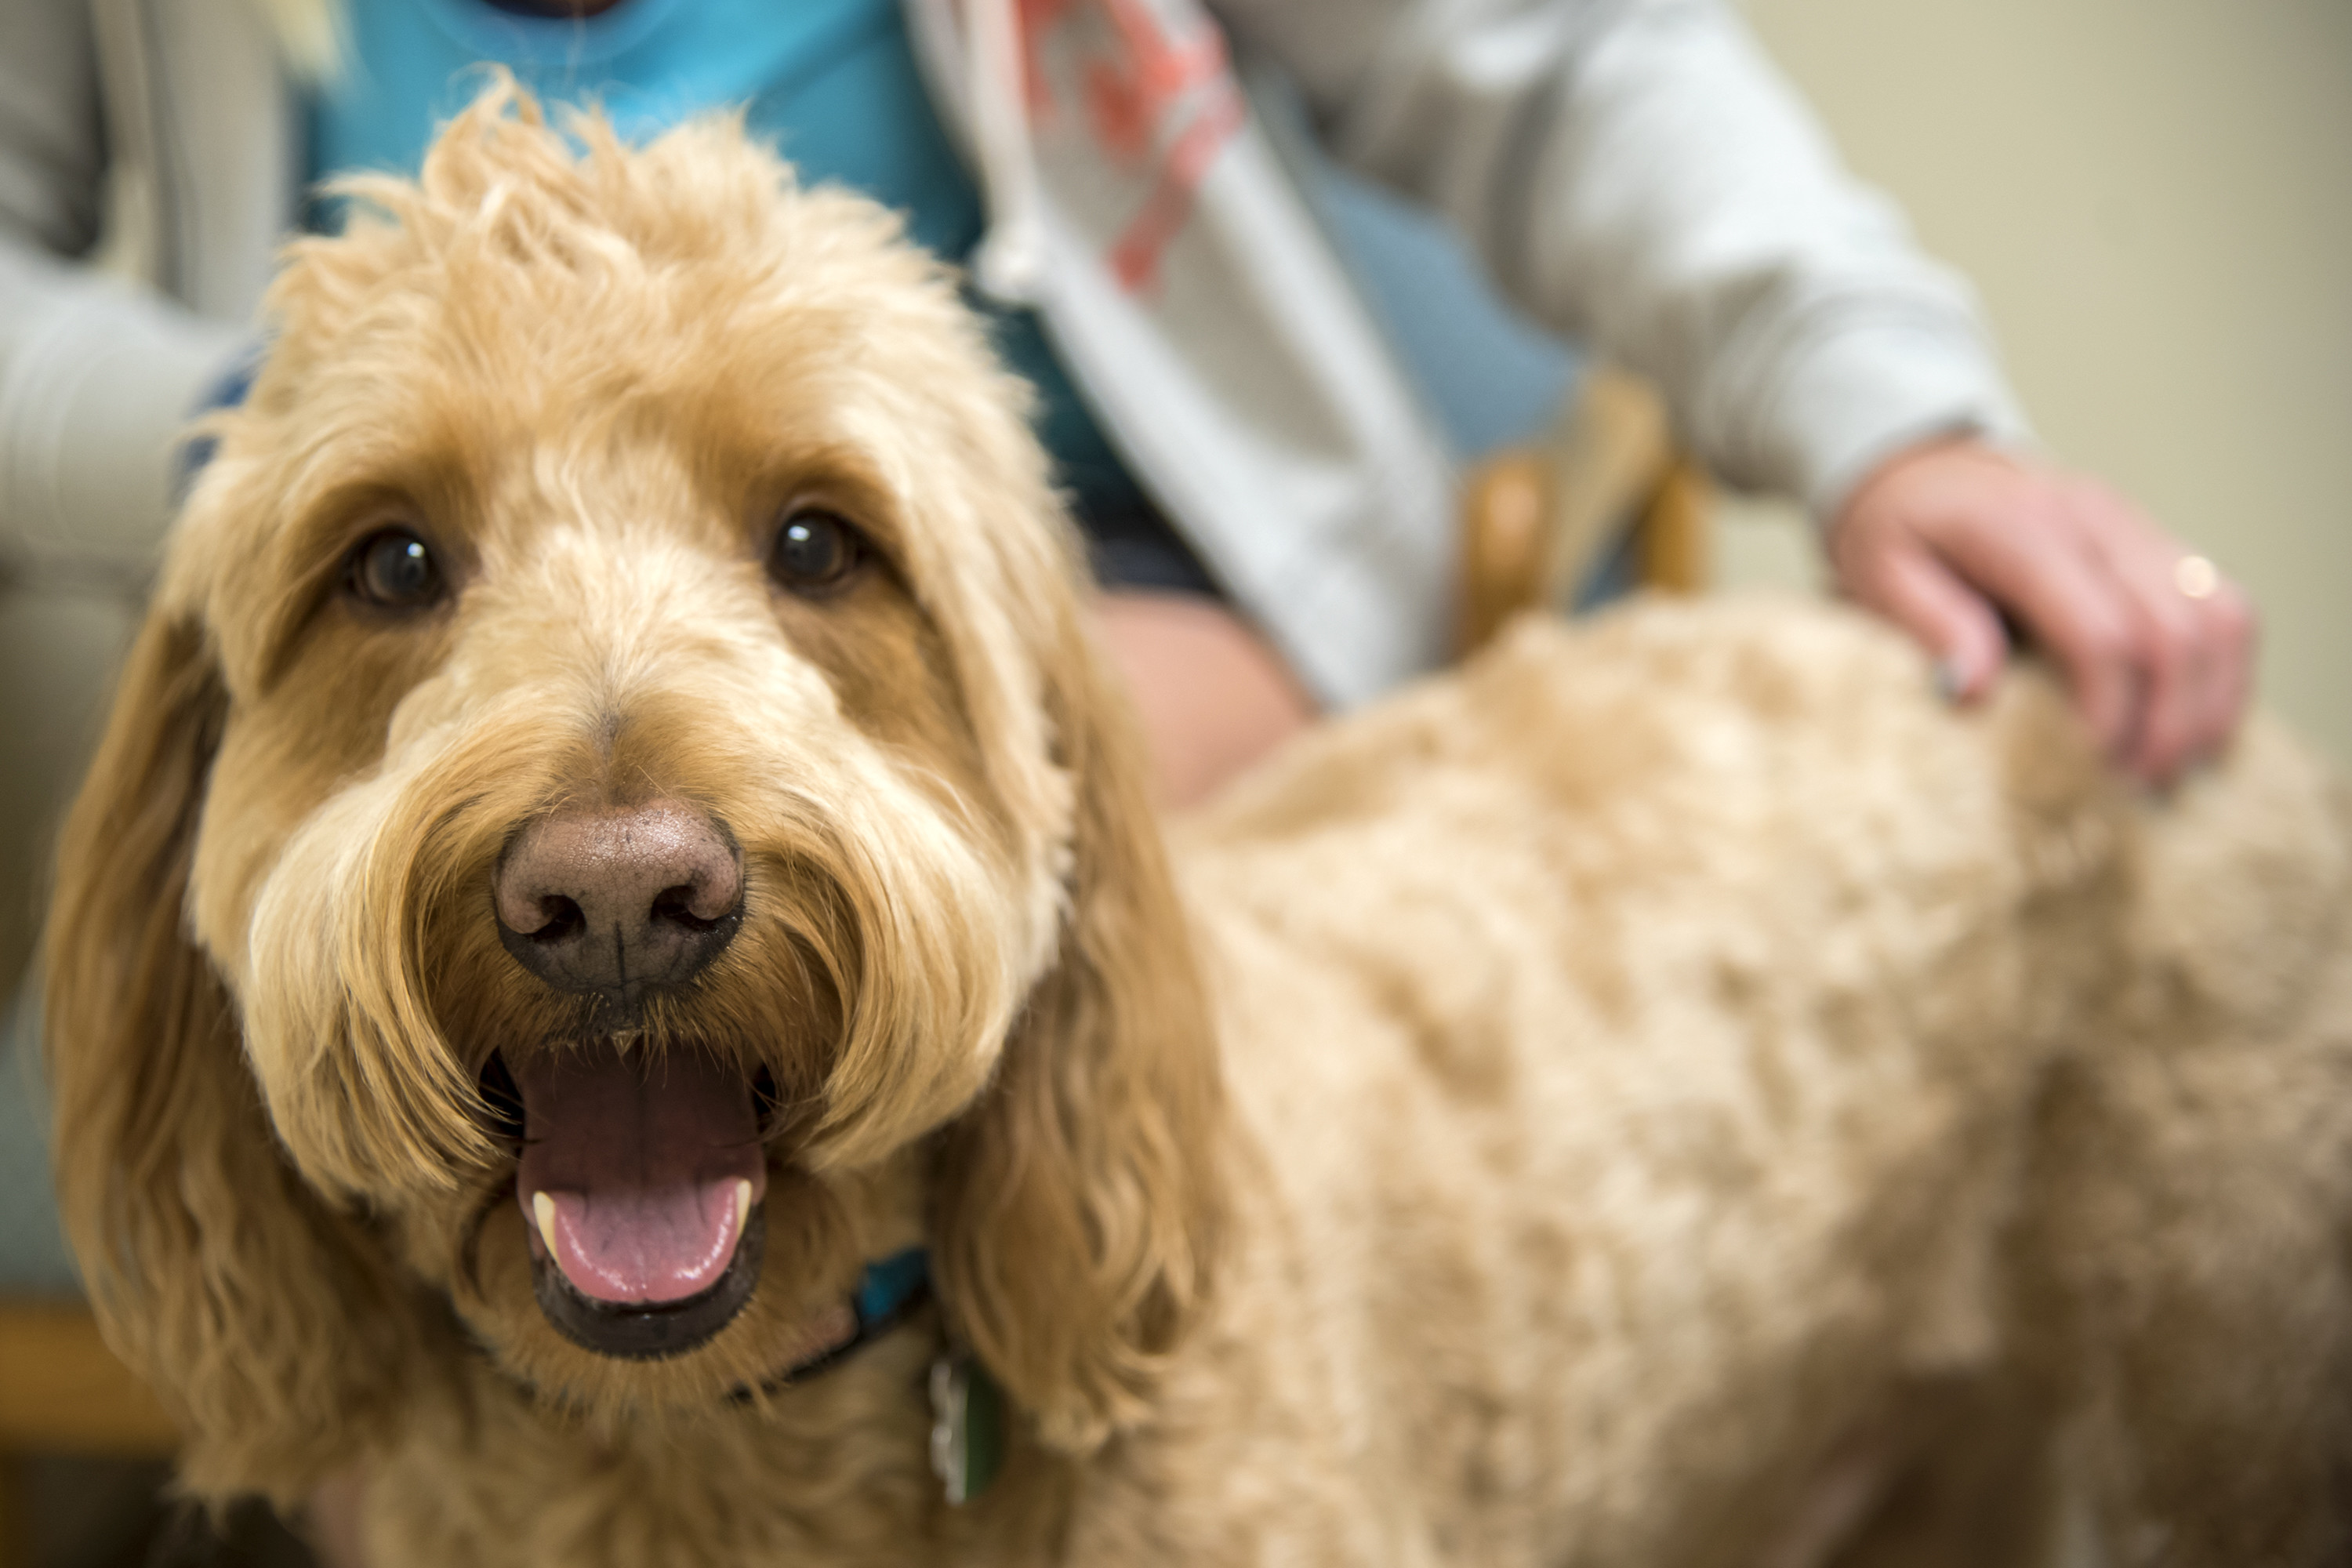 hygiene is crucial for summer months be sure to get your pup clean like this cute golden doodle - tips from Dog Training Elite